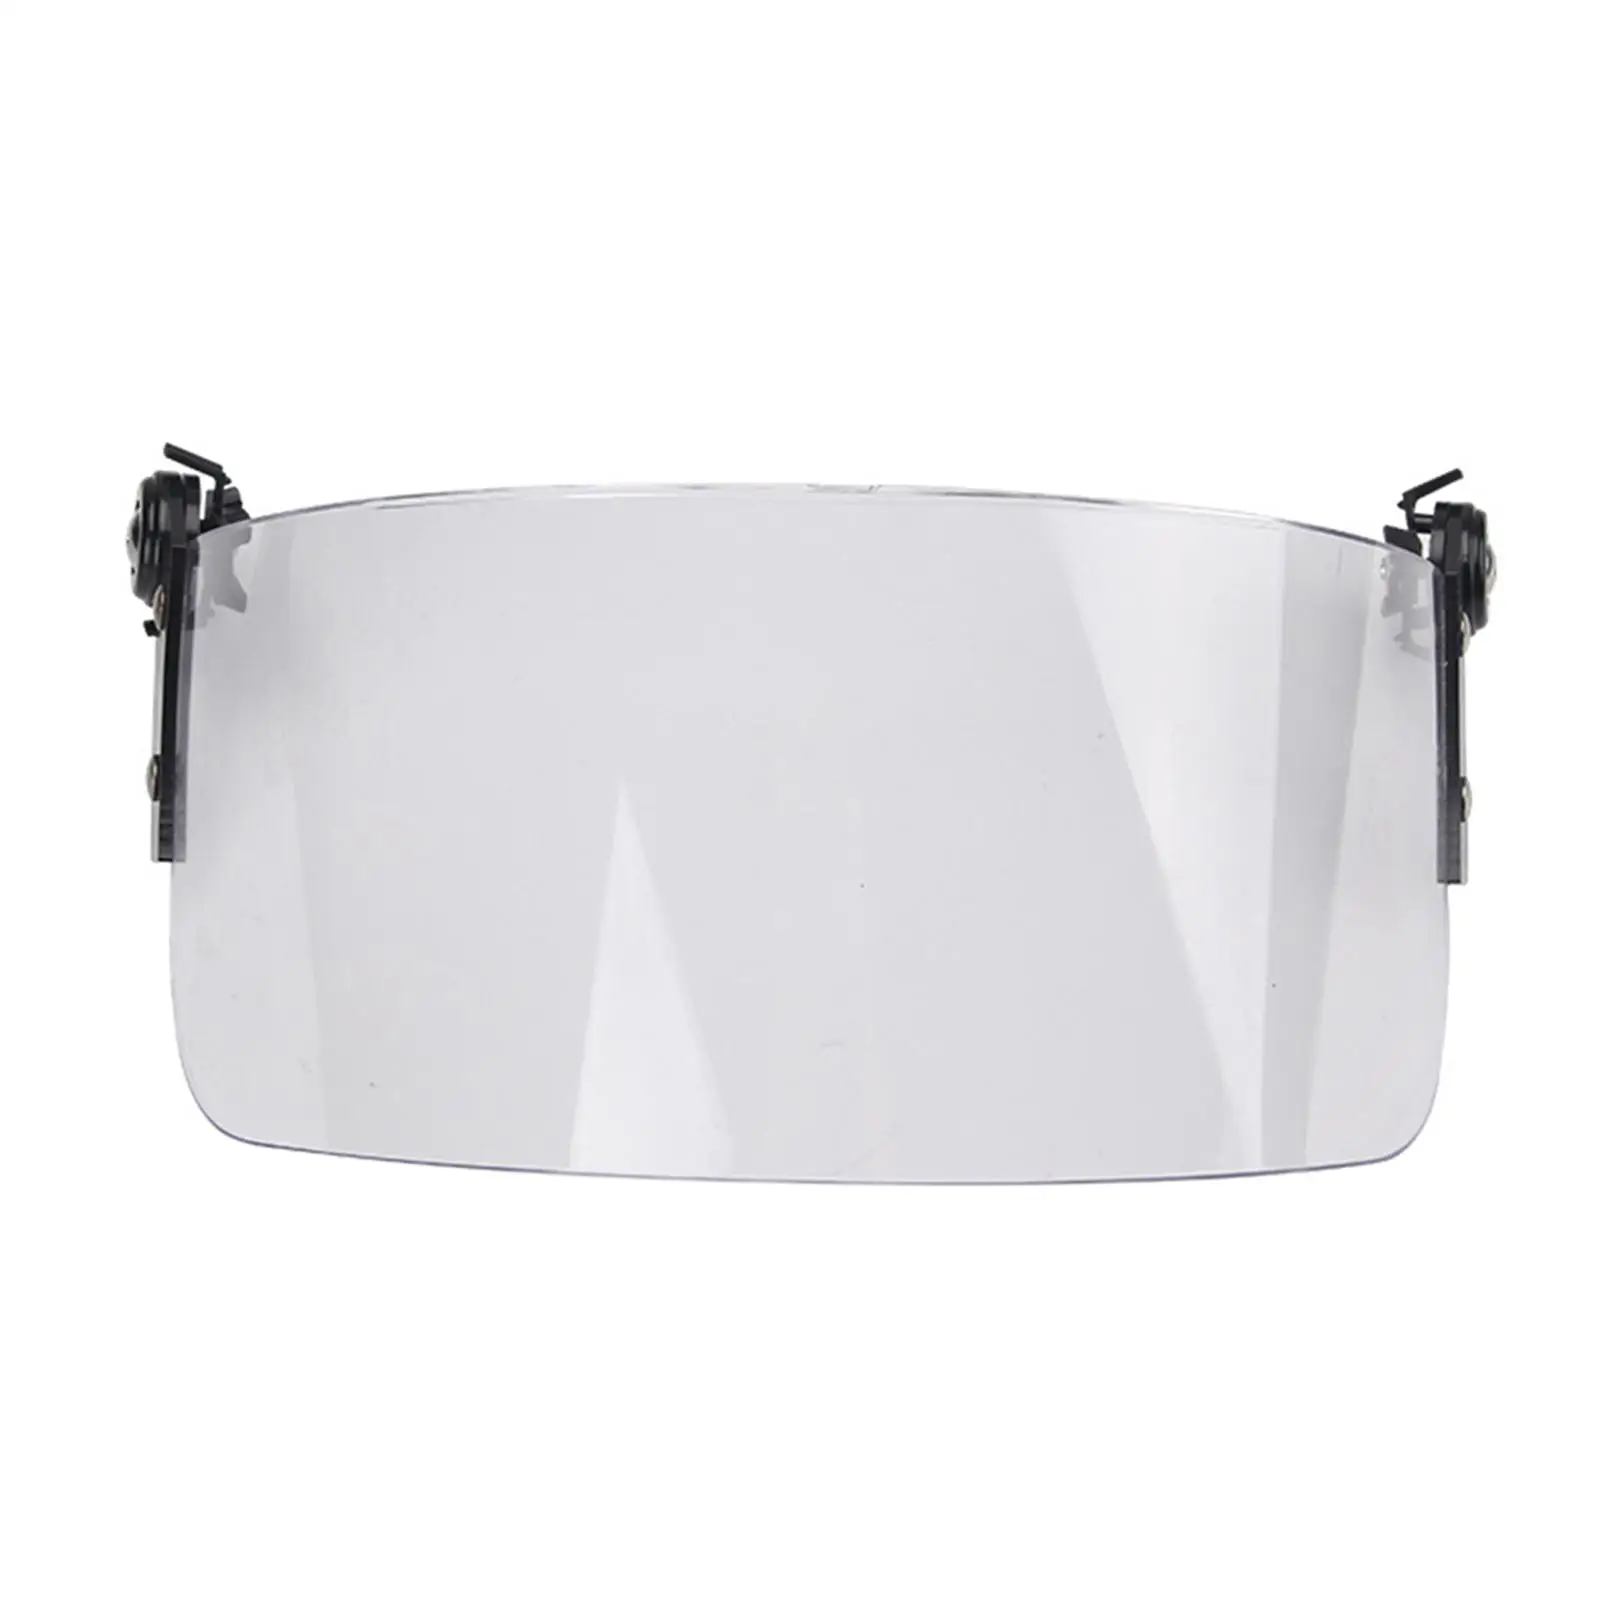 Motorcycle Wind Shield Lens Clear Shield Anti Fog for Snowmobile Unisex